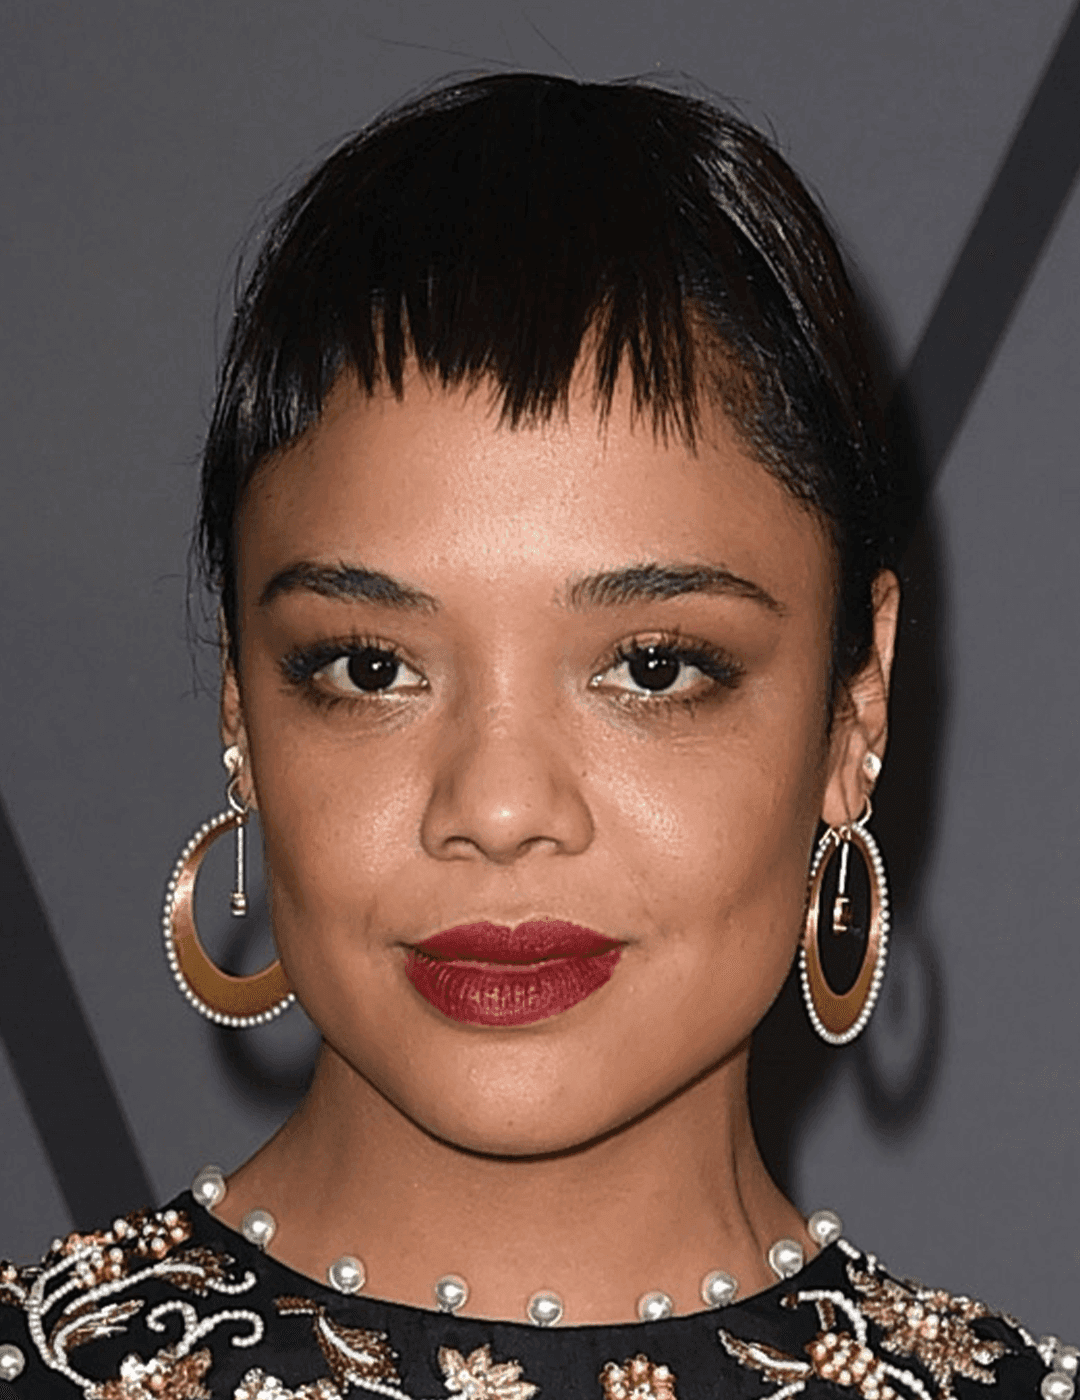 Tessa Thompson rocking a black and gold dress, neutral eye makeup with berry lips, gold hoop earrings, and a pixie cut hairstyle with micro bangs